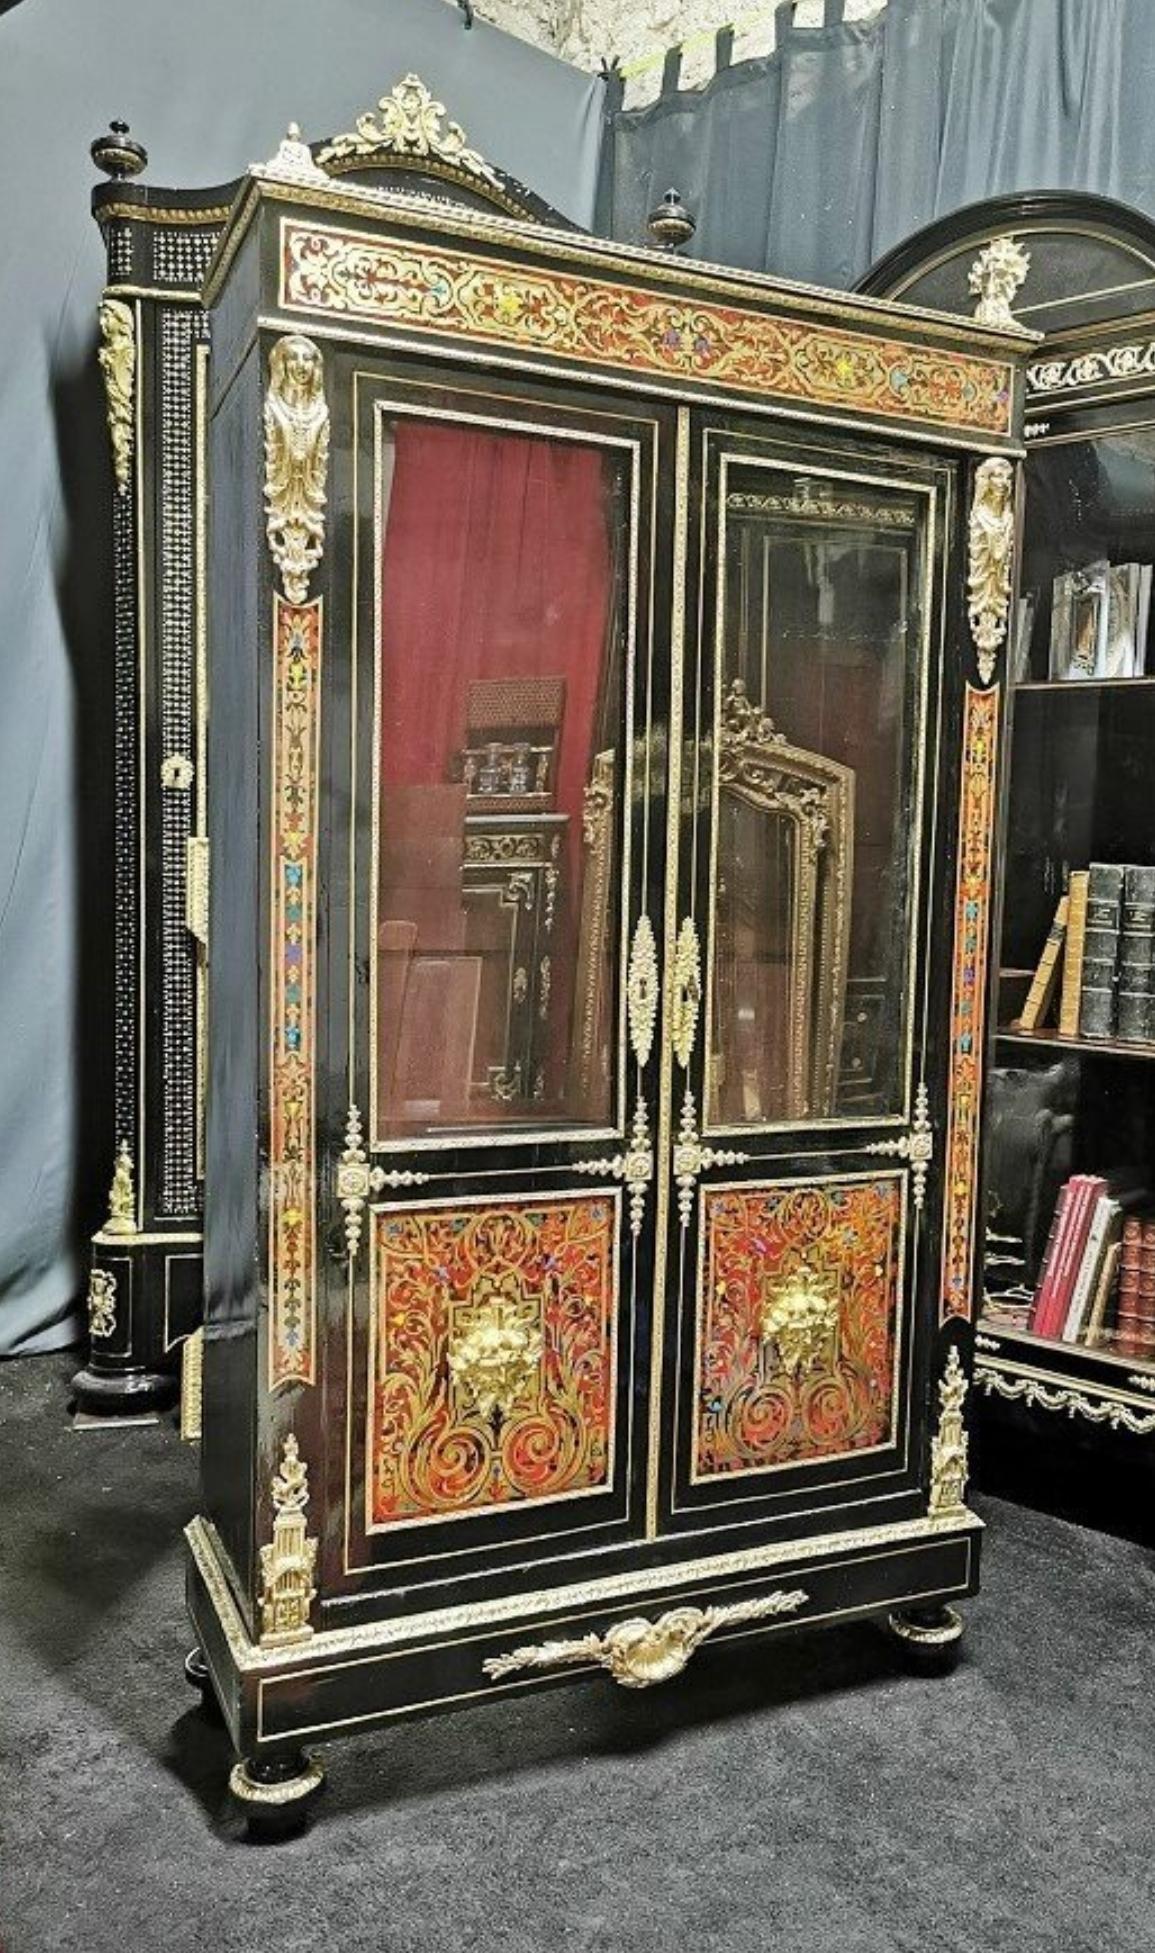 Napoleon III bookcase vitrine with two doors in Boulle Marquetry style in brass ball marquetry and tortoiseshell, with interlacing patterns and scrolls. Beautiful ornamentation of gilded bronzes with molds, masques and falls.
Restored by our